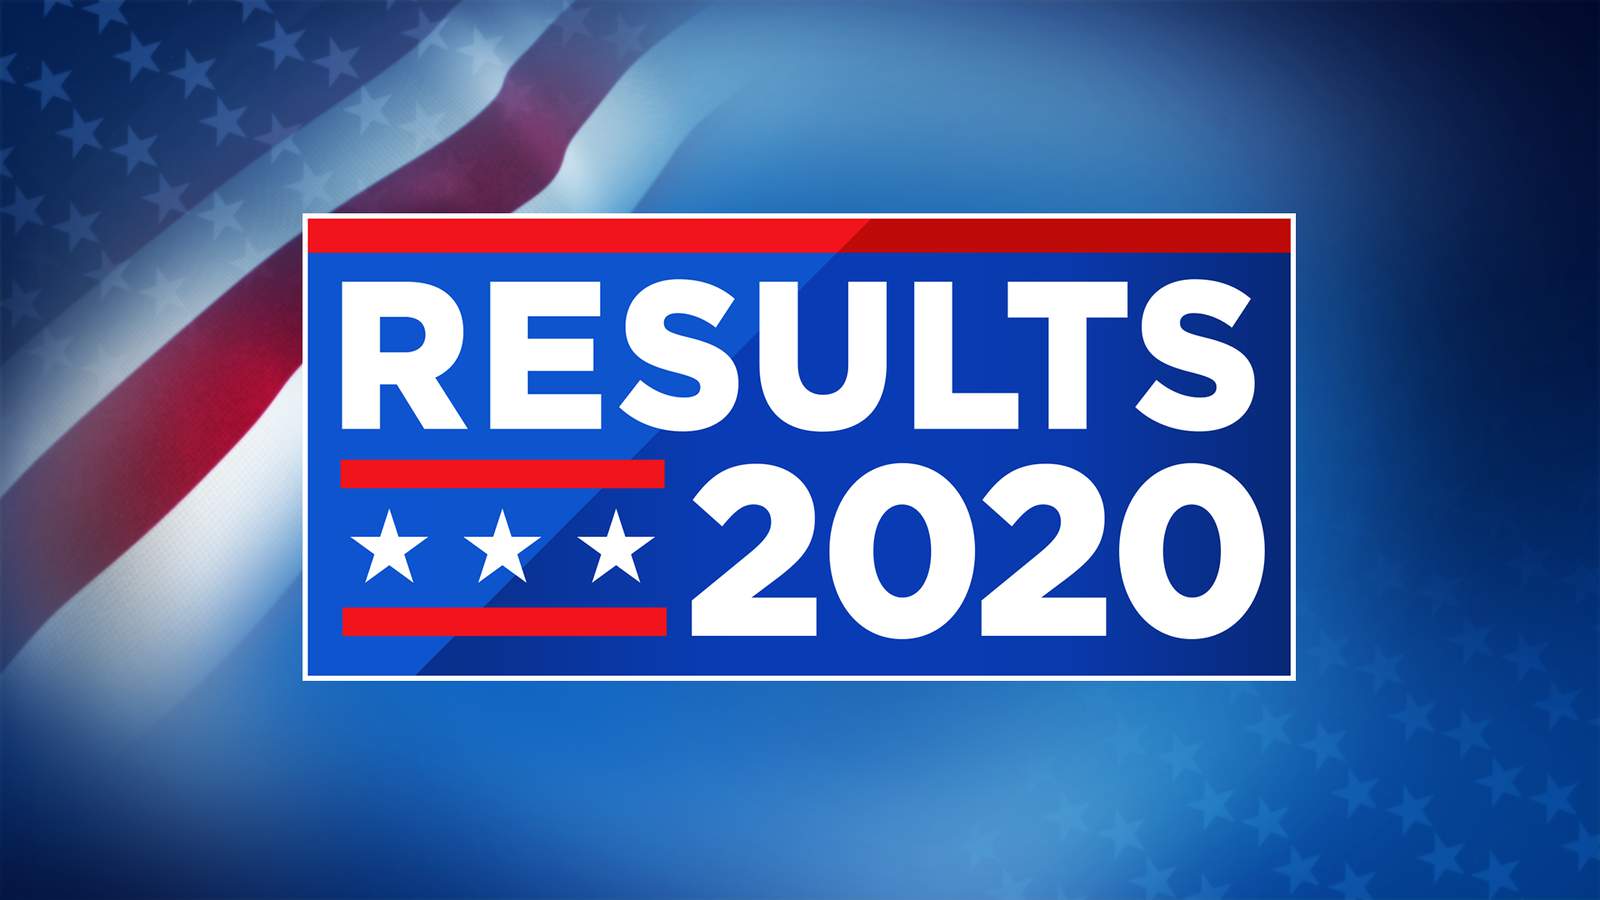 Florida General Election Results for All Races on Nov. 3, 2020